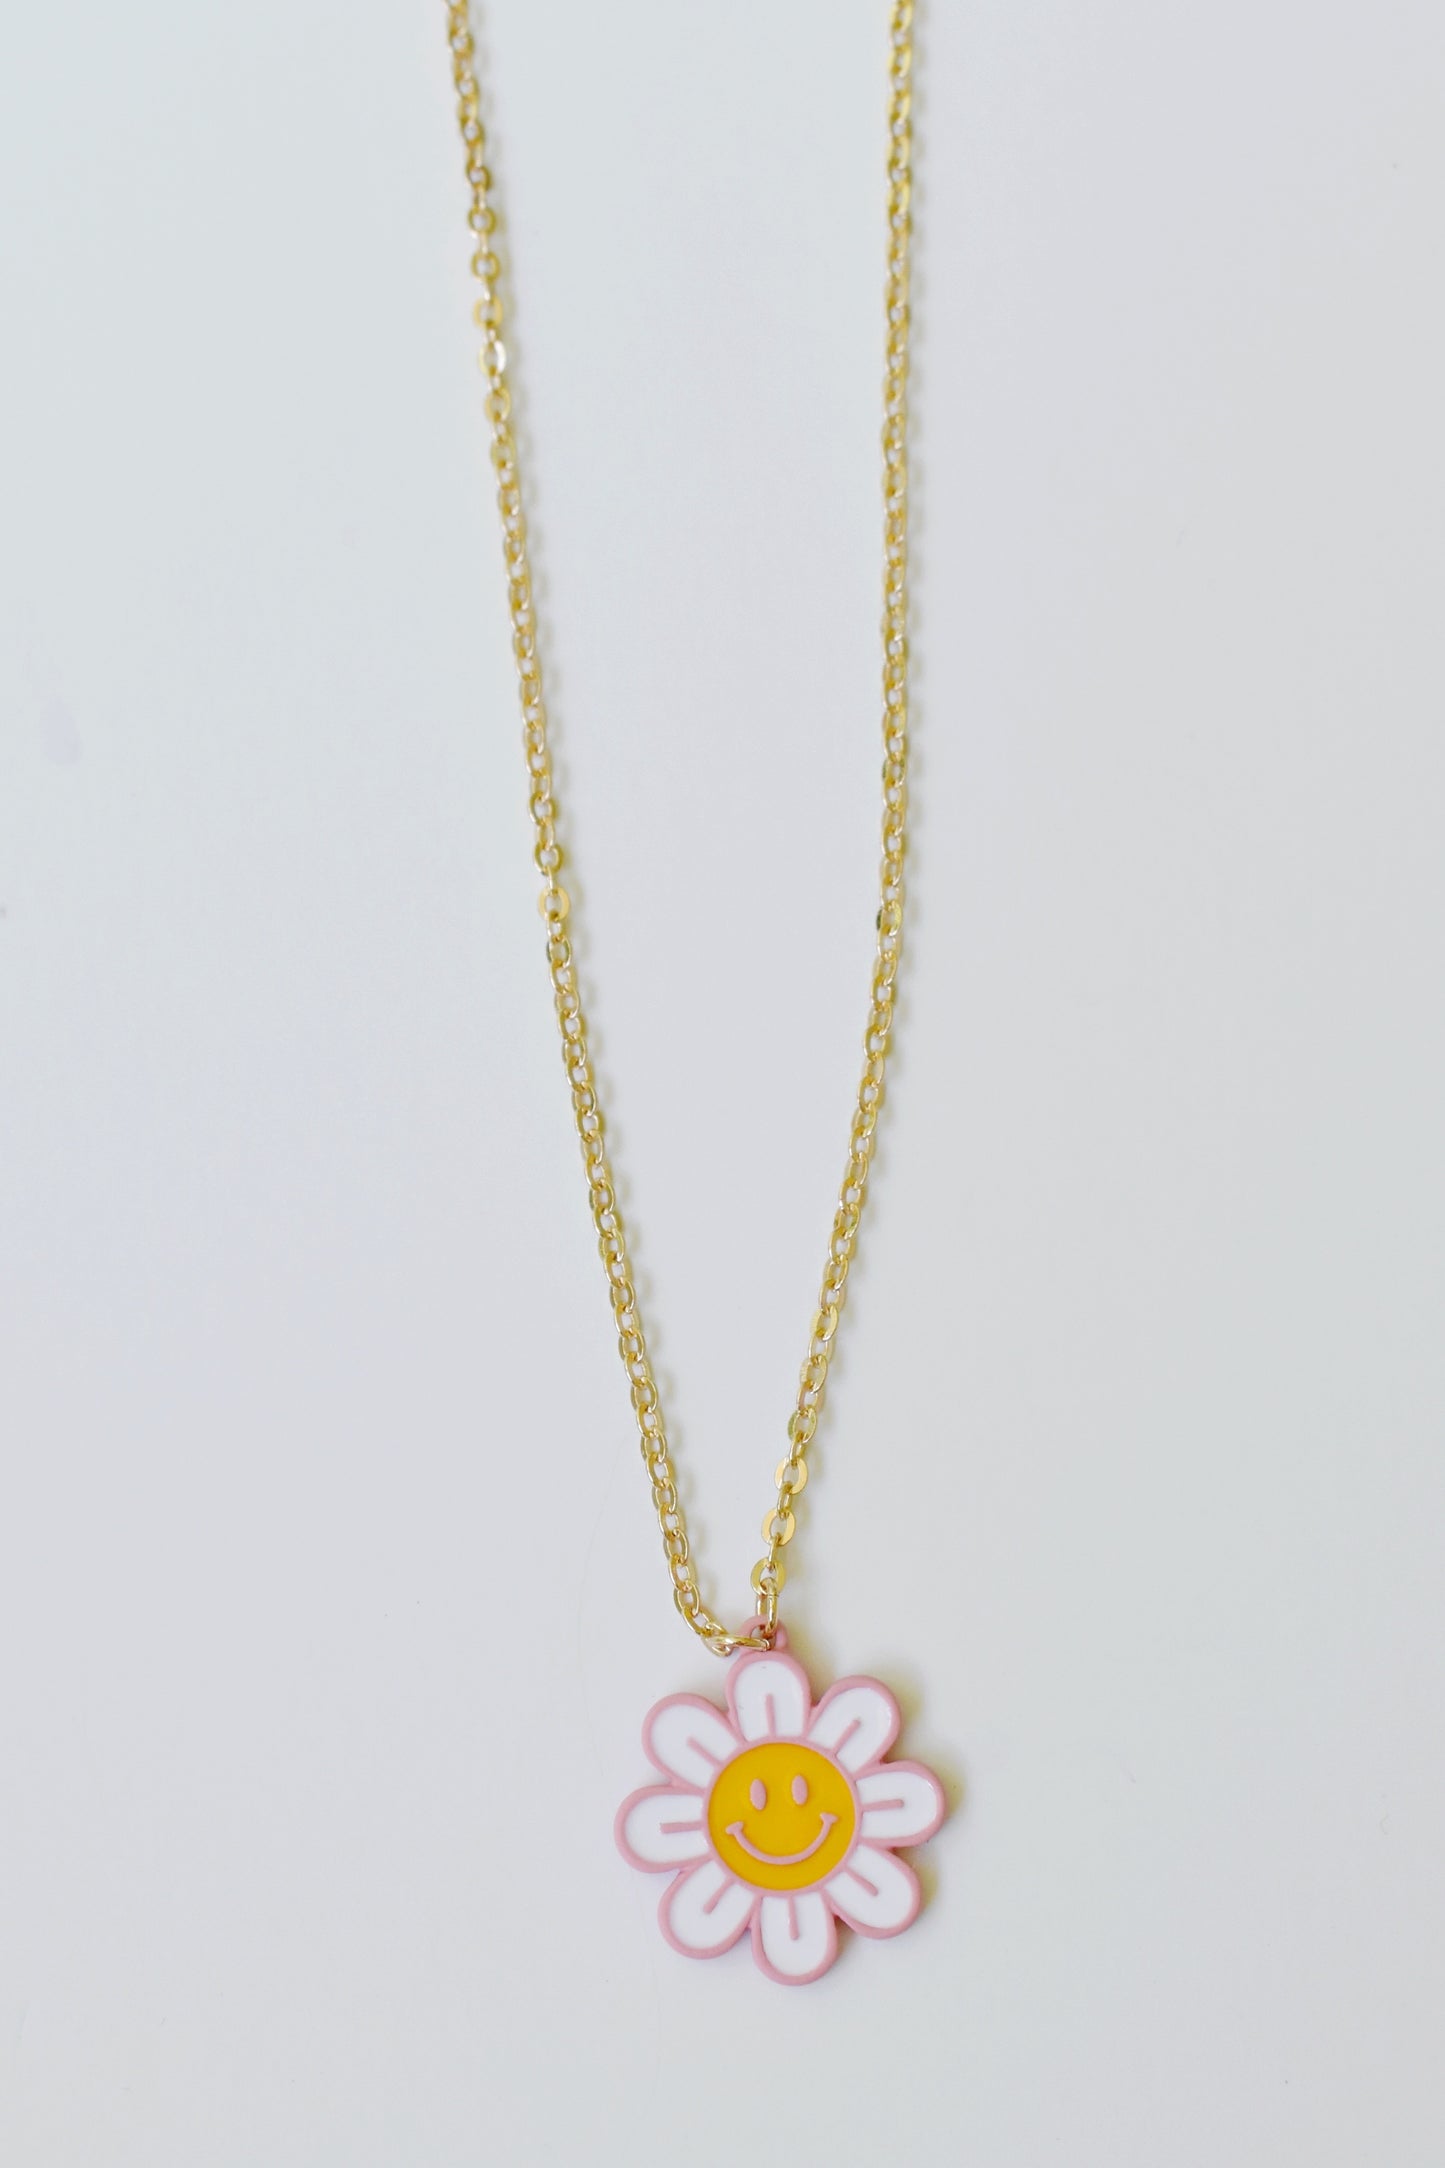 Flower Smiley Necklace